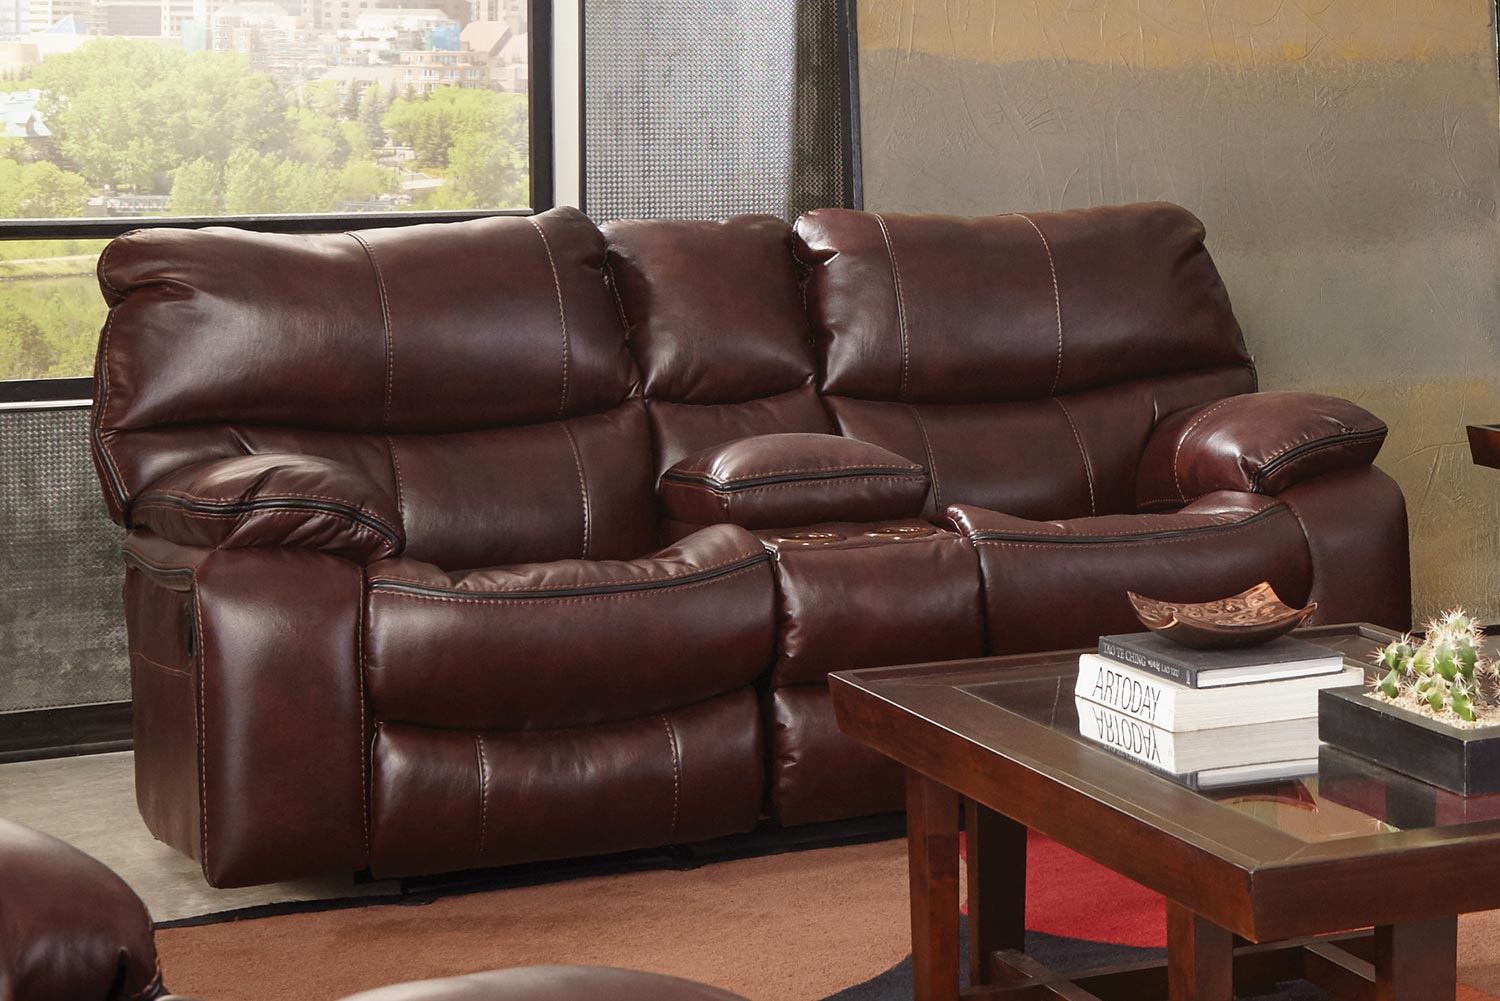 CatNapper Camden Power Lay Flat Reclining Console Loveseat with Storage and Cupholders - Walnut